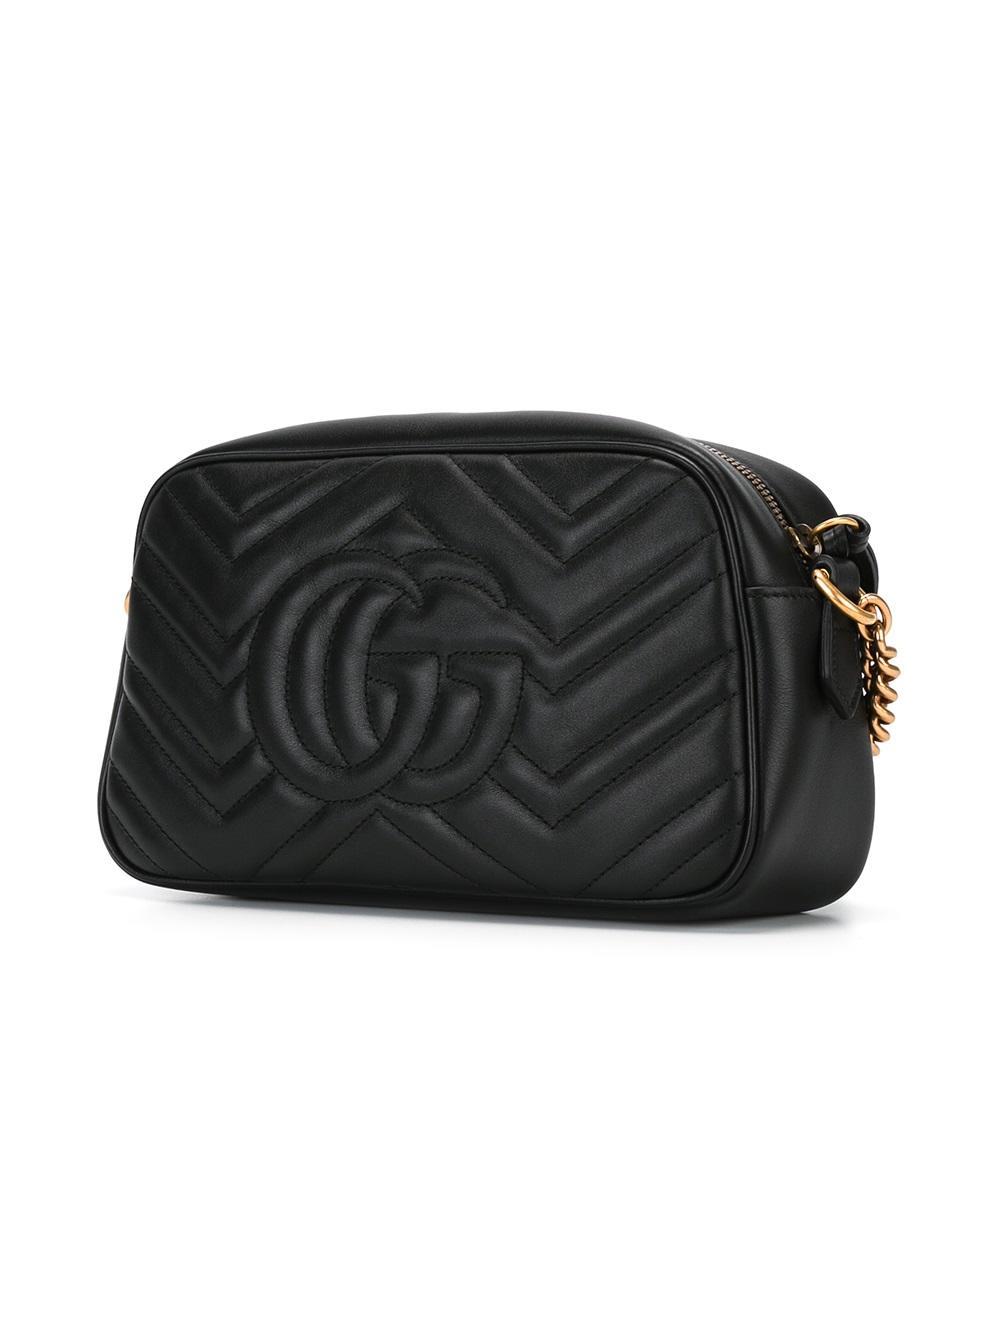 Lyst - Gucci Quilted Crossbody Bag in Black